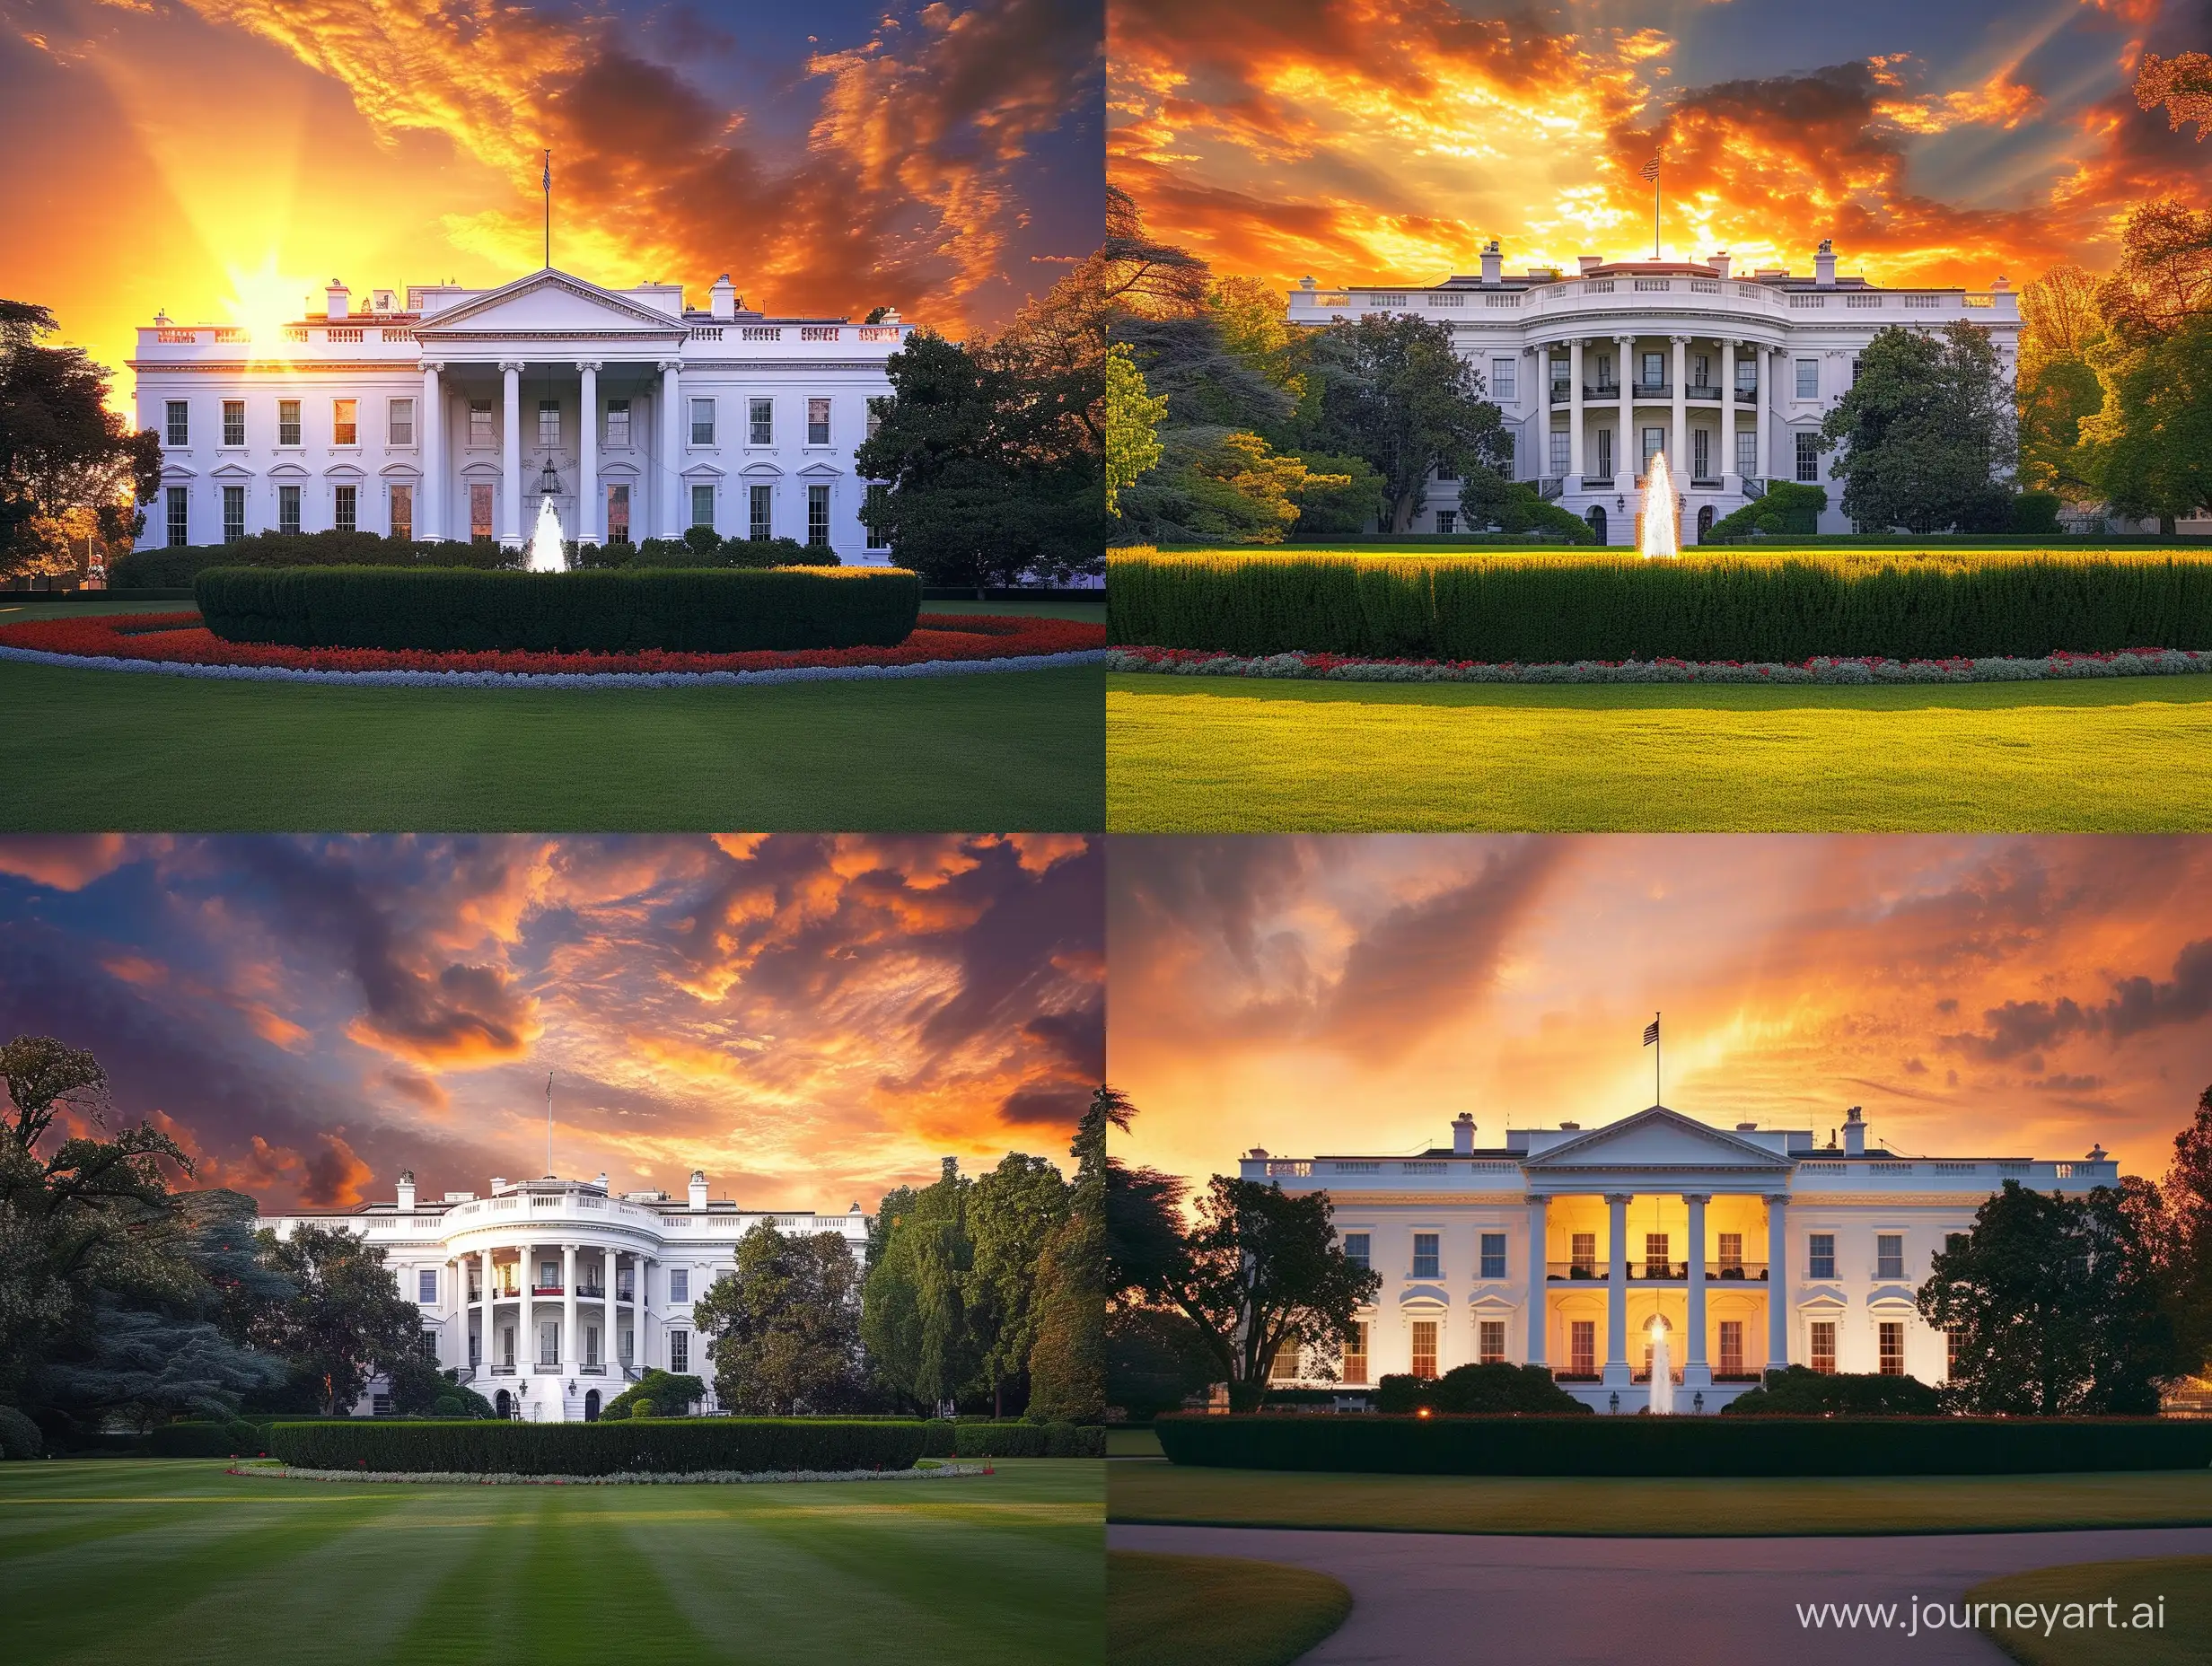 A cinematic wide, zoomed out photo of The White House at sunset